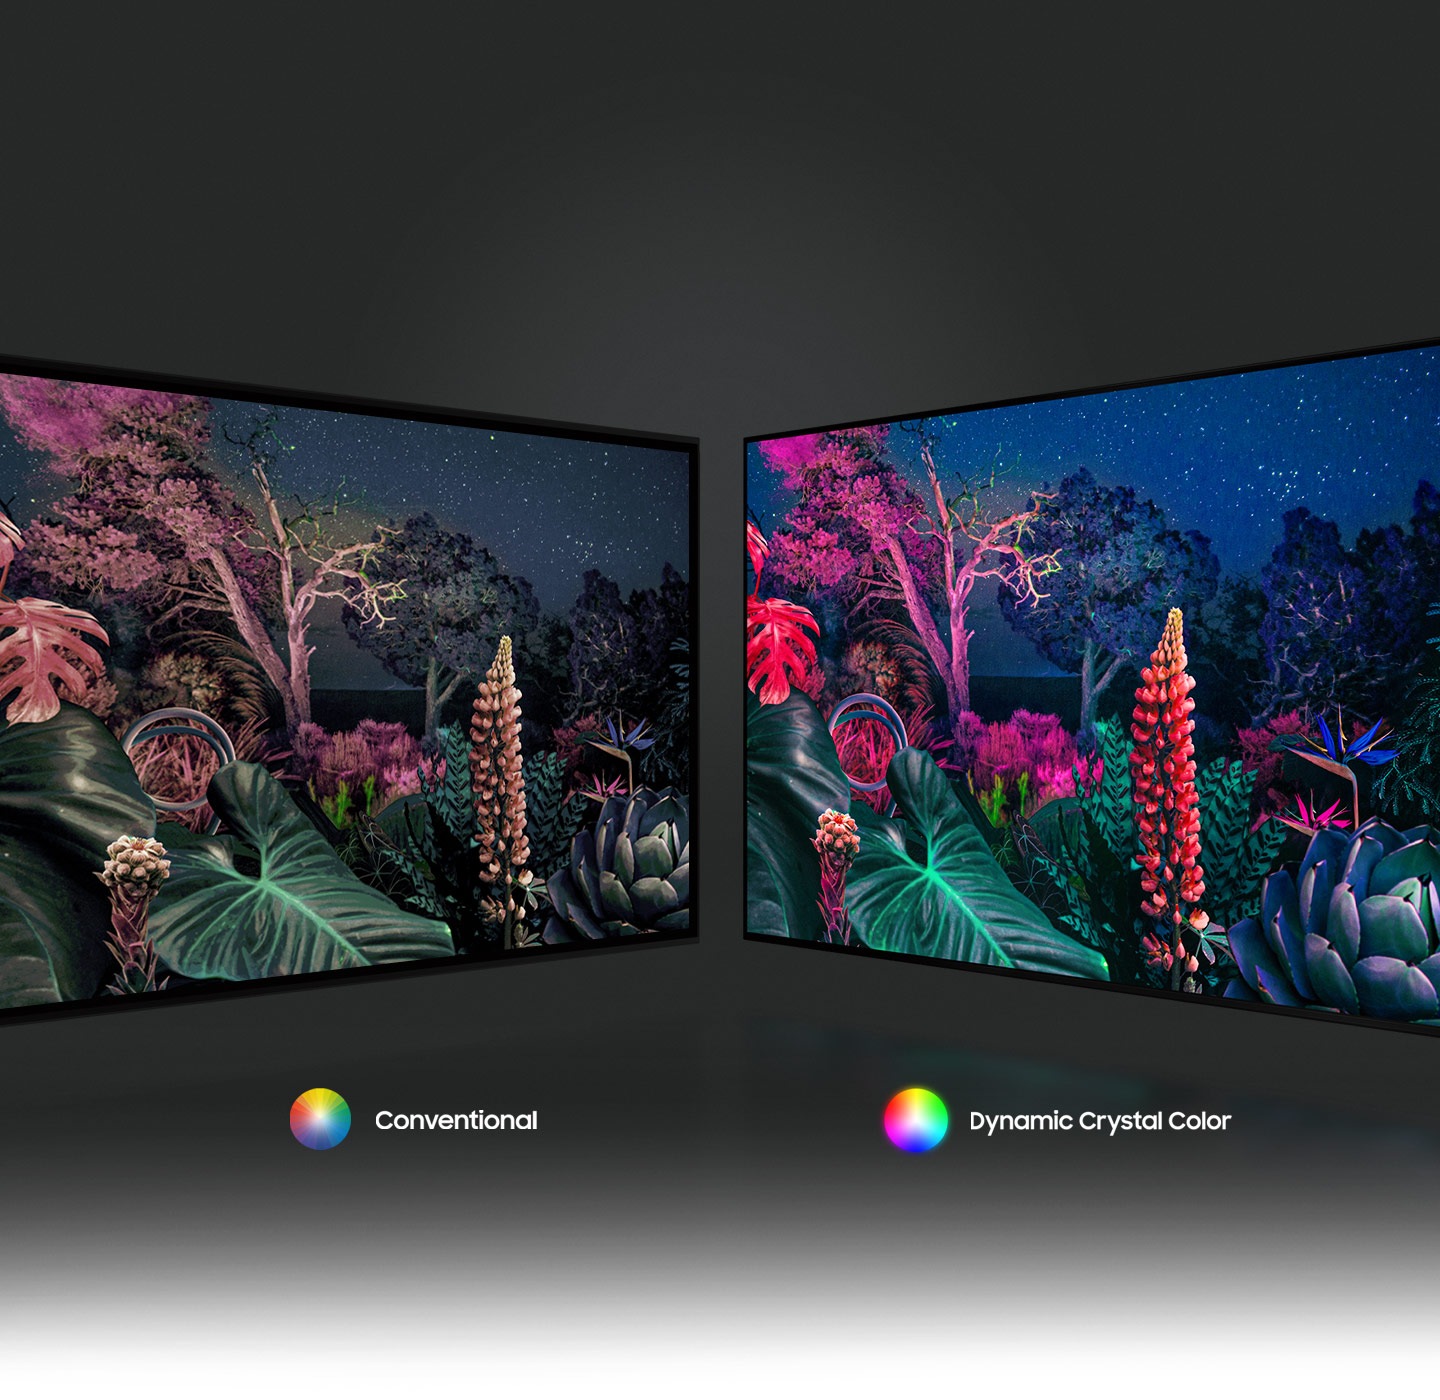 The forest image on the right demonstrates a more intricately colored image due to Dynamic Crystal Color technology compare to the conventional on the left. SAMSUNG 75" Crystal 4K Smart UHD TV UA75AU8000RSFS